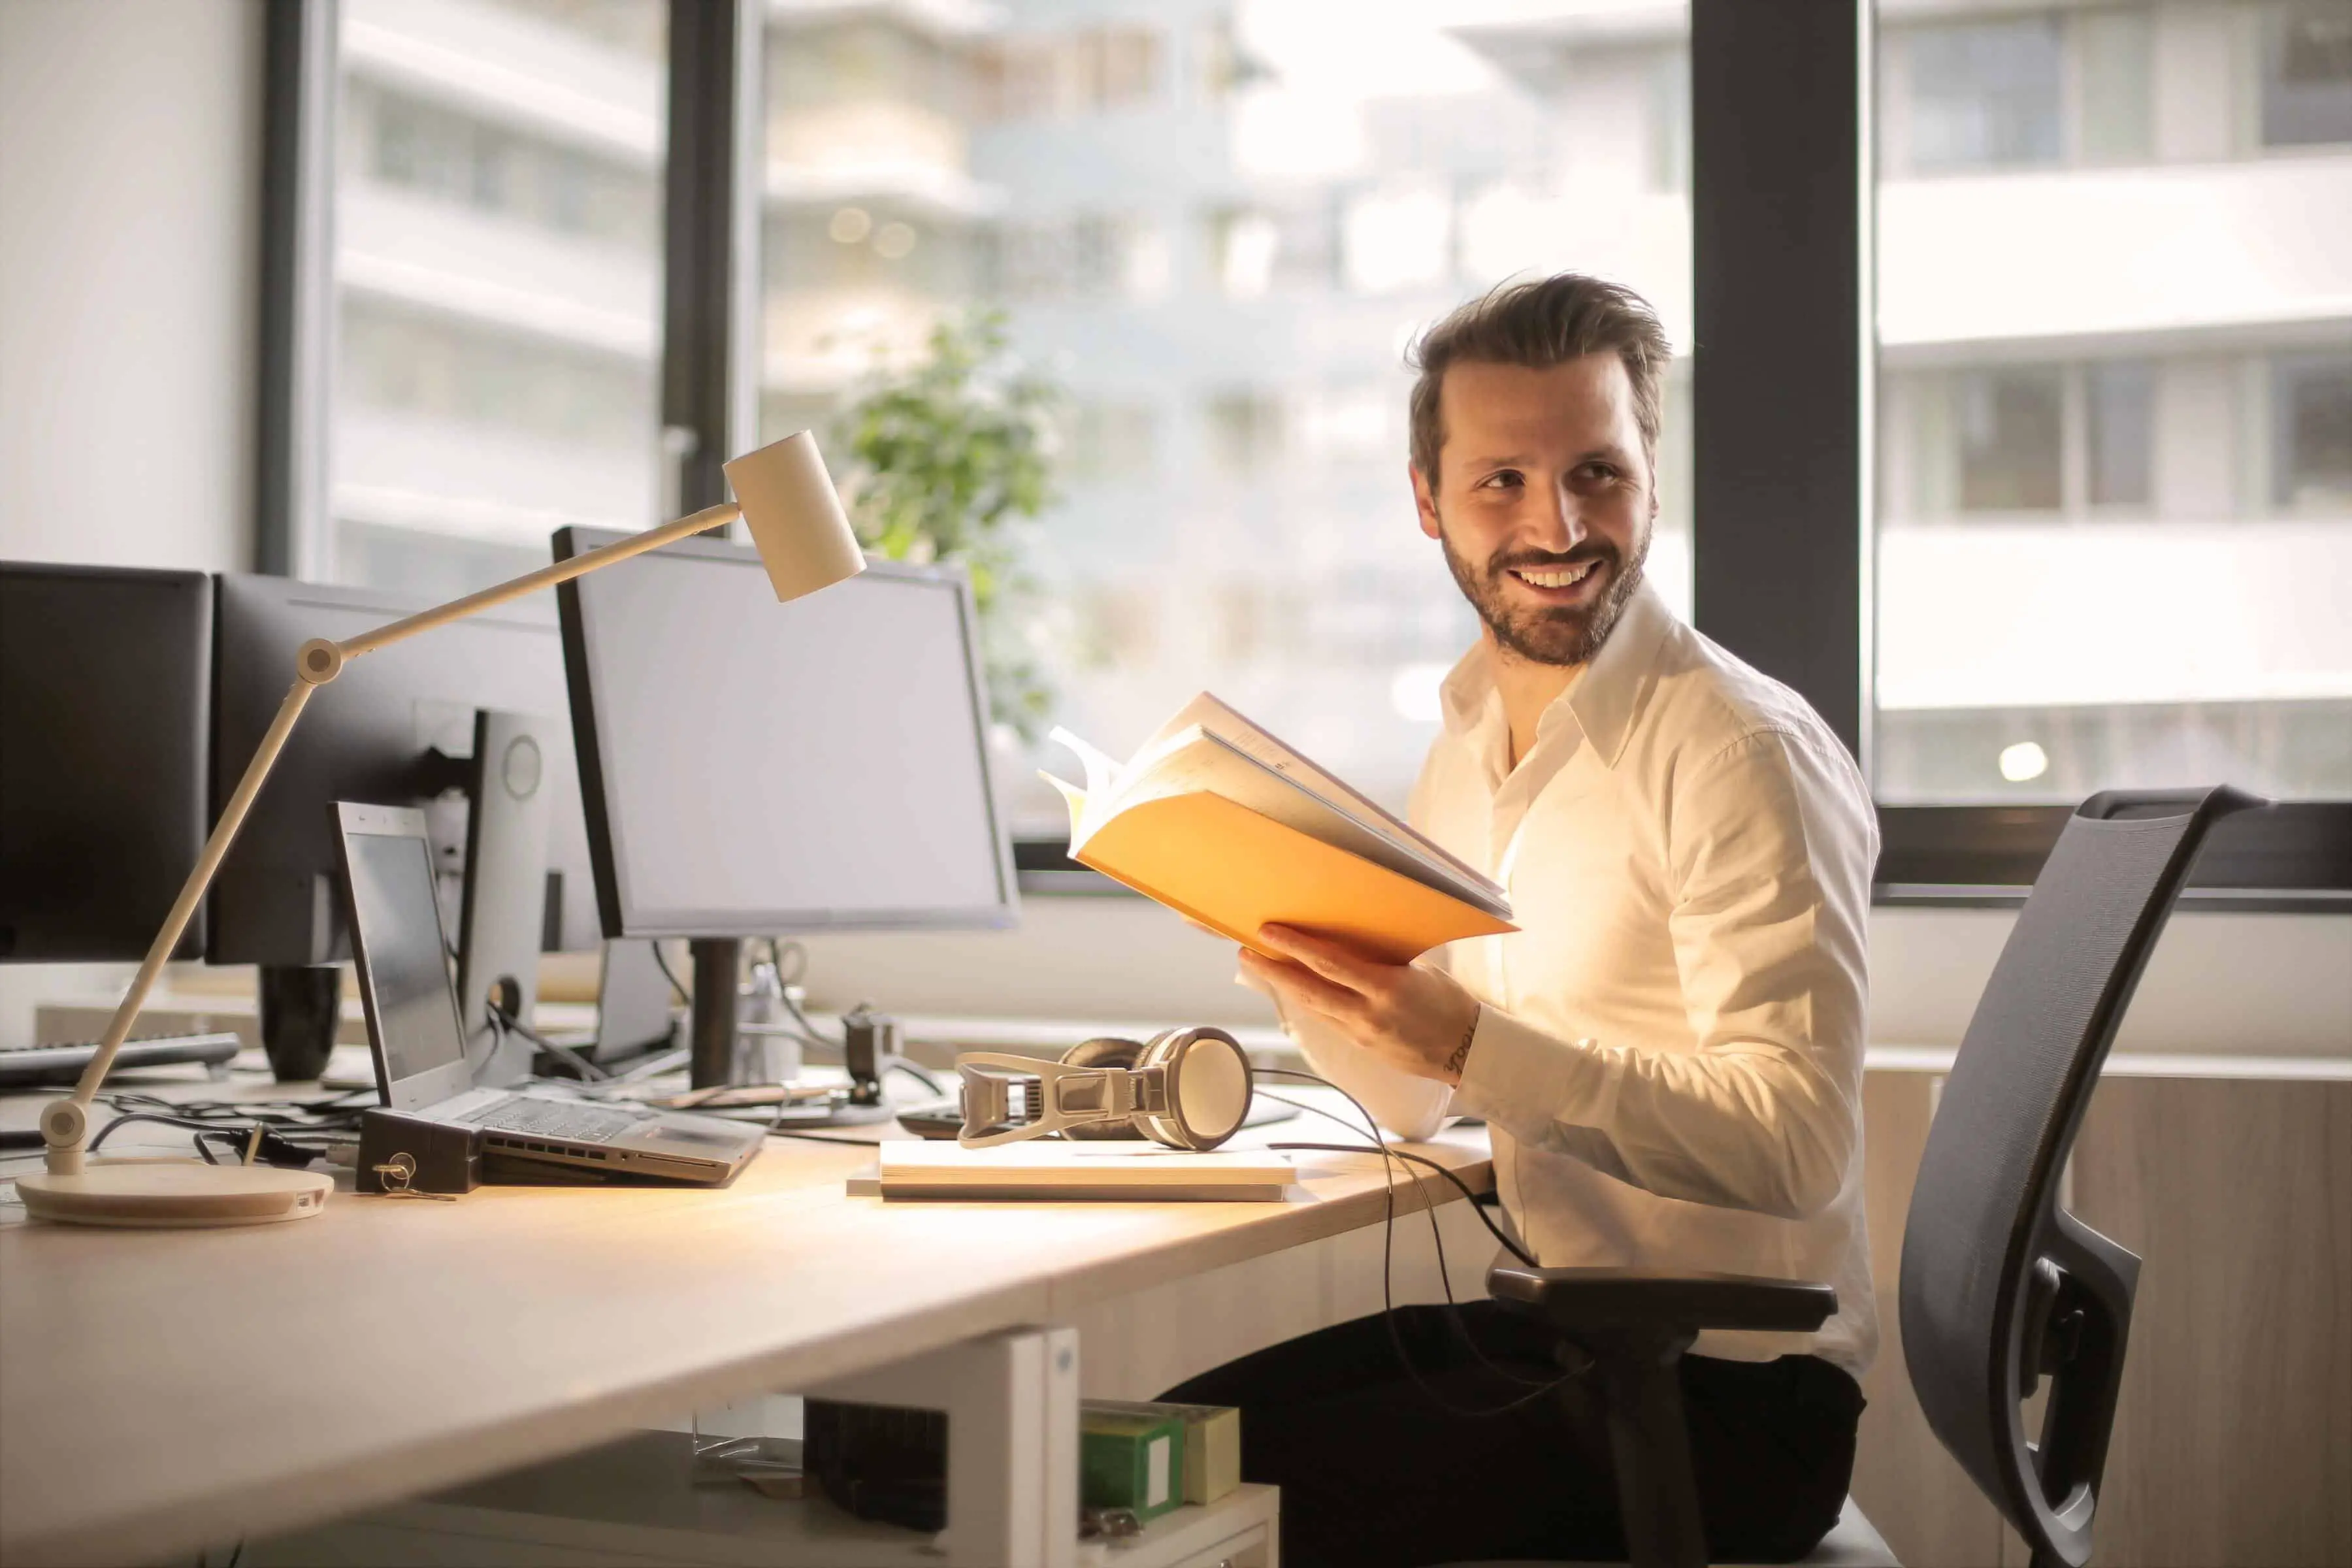 Smiling man sitting at a desk while holding a book